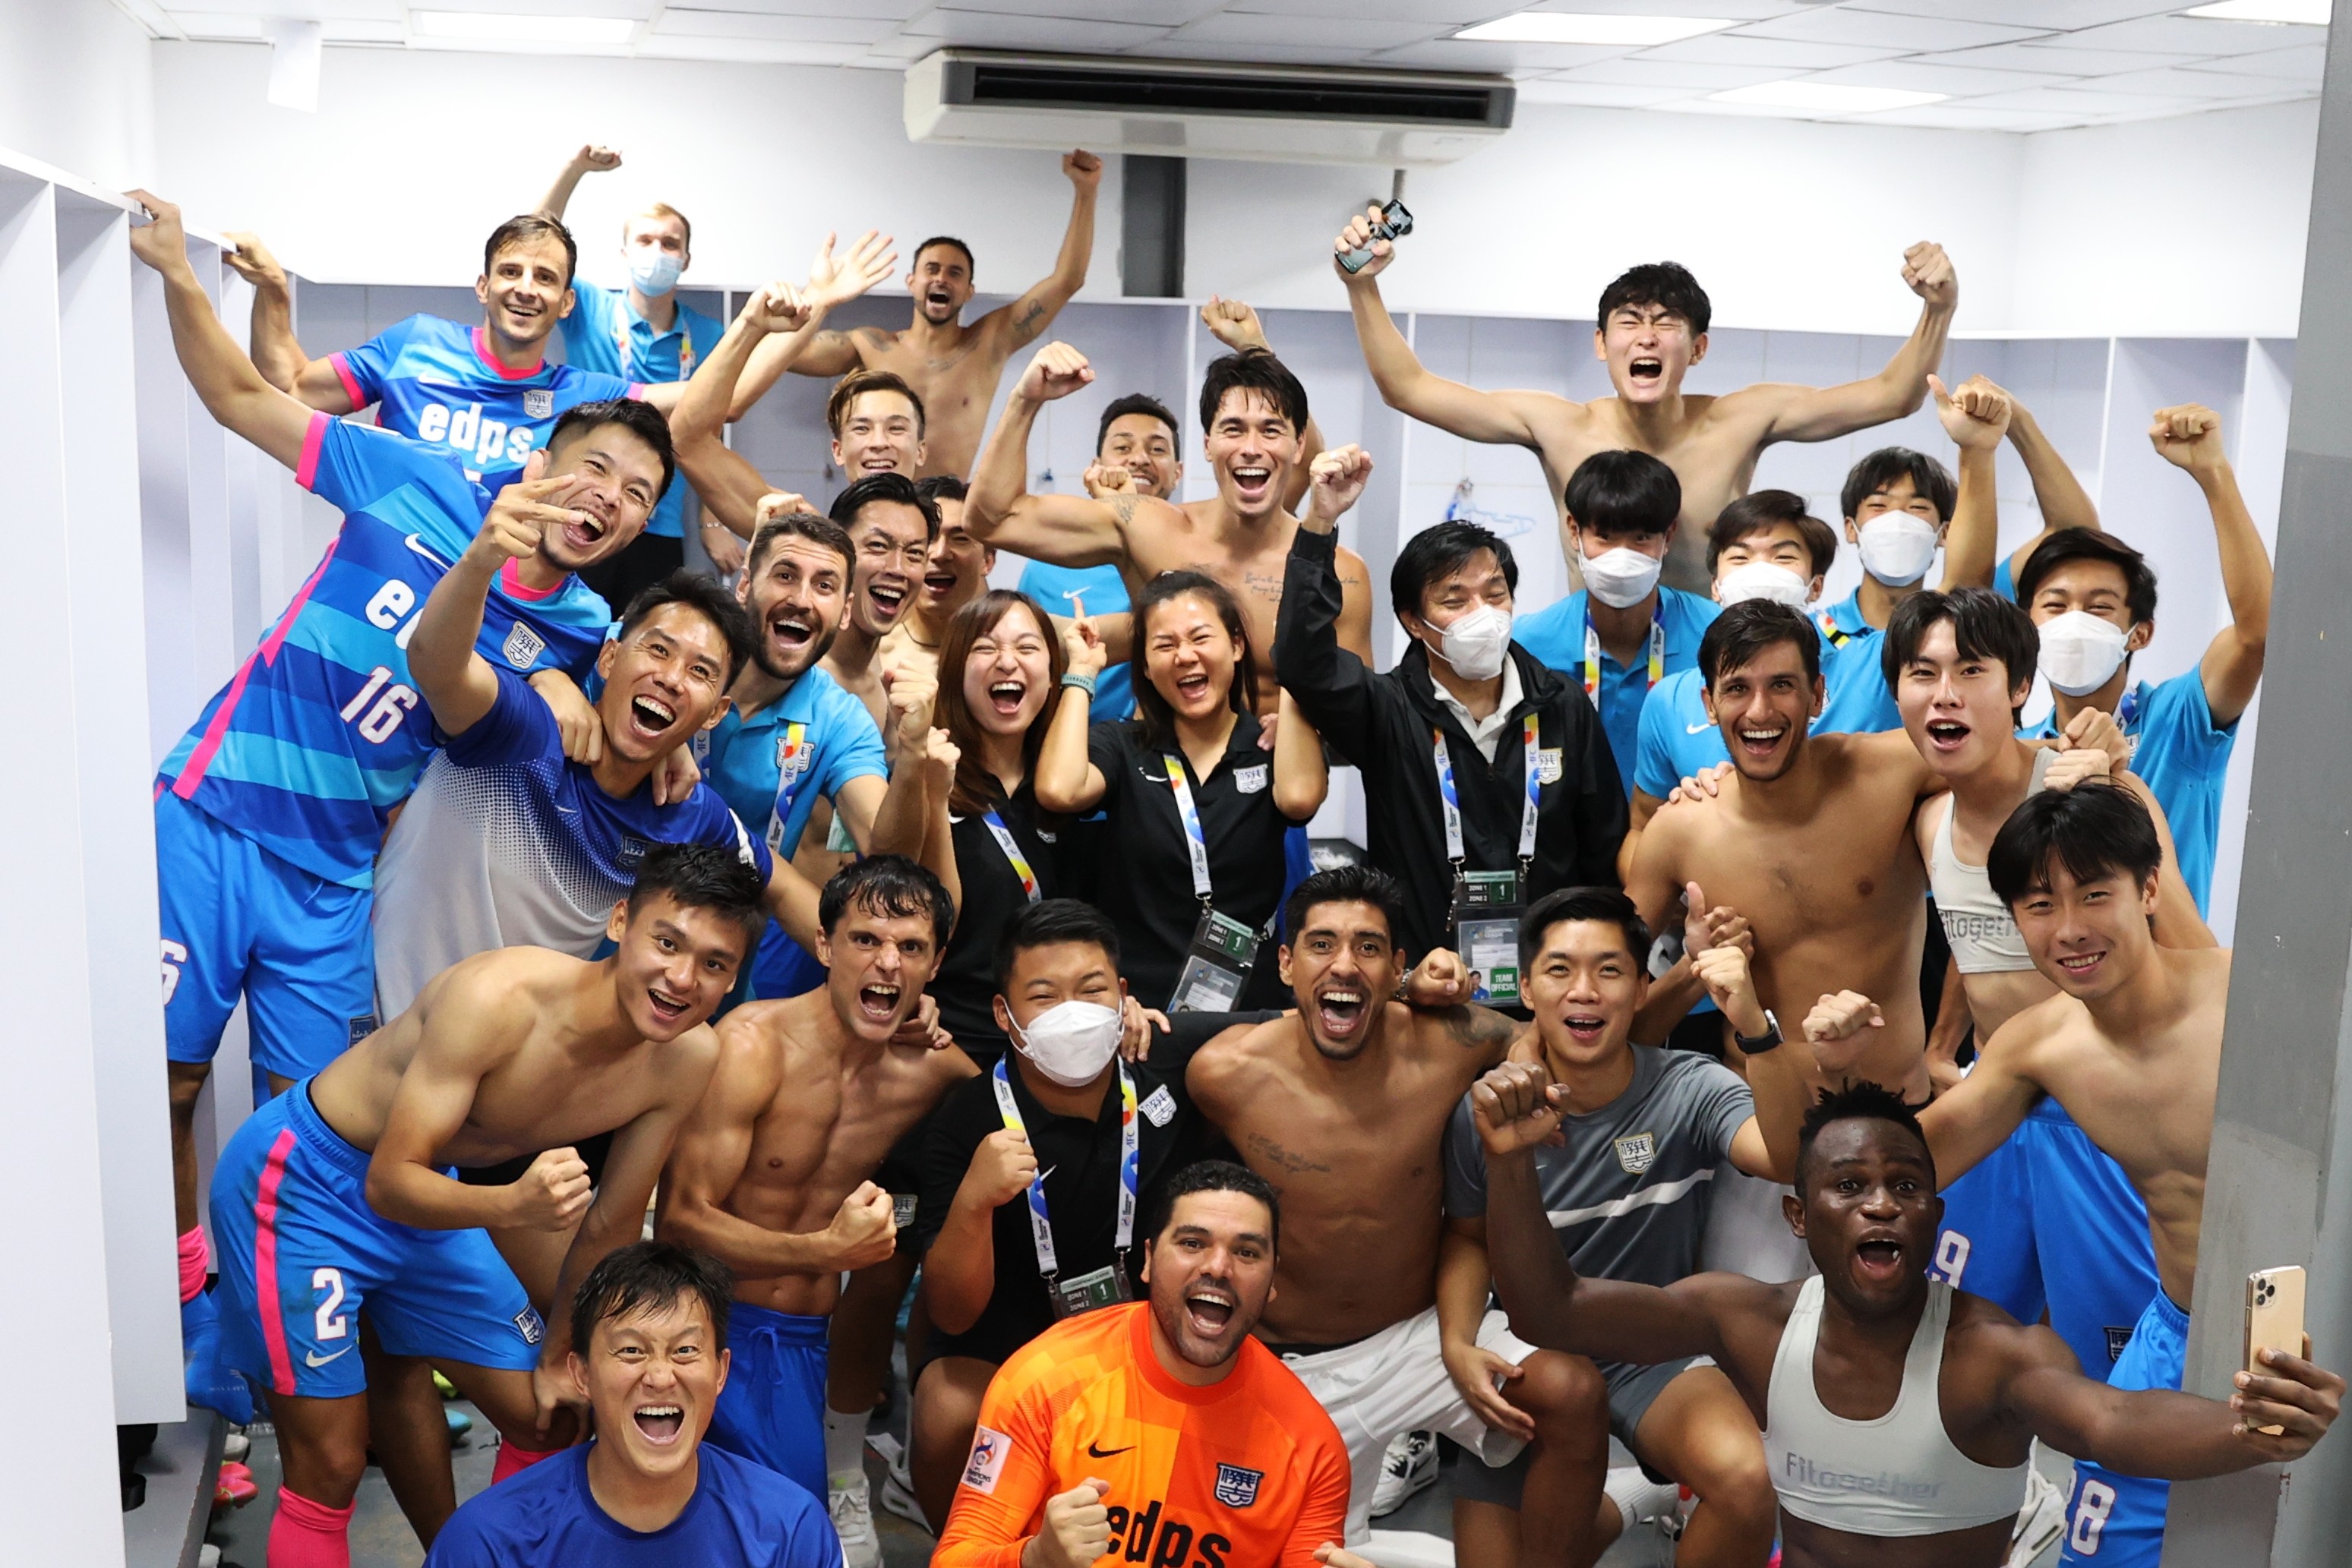 Celebrations in the changing room after Kitchee reach the round of 16 in the AFC Champions League. Photo: Kitchee